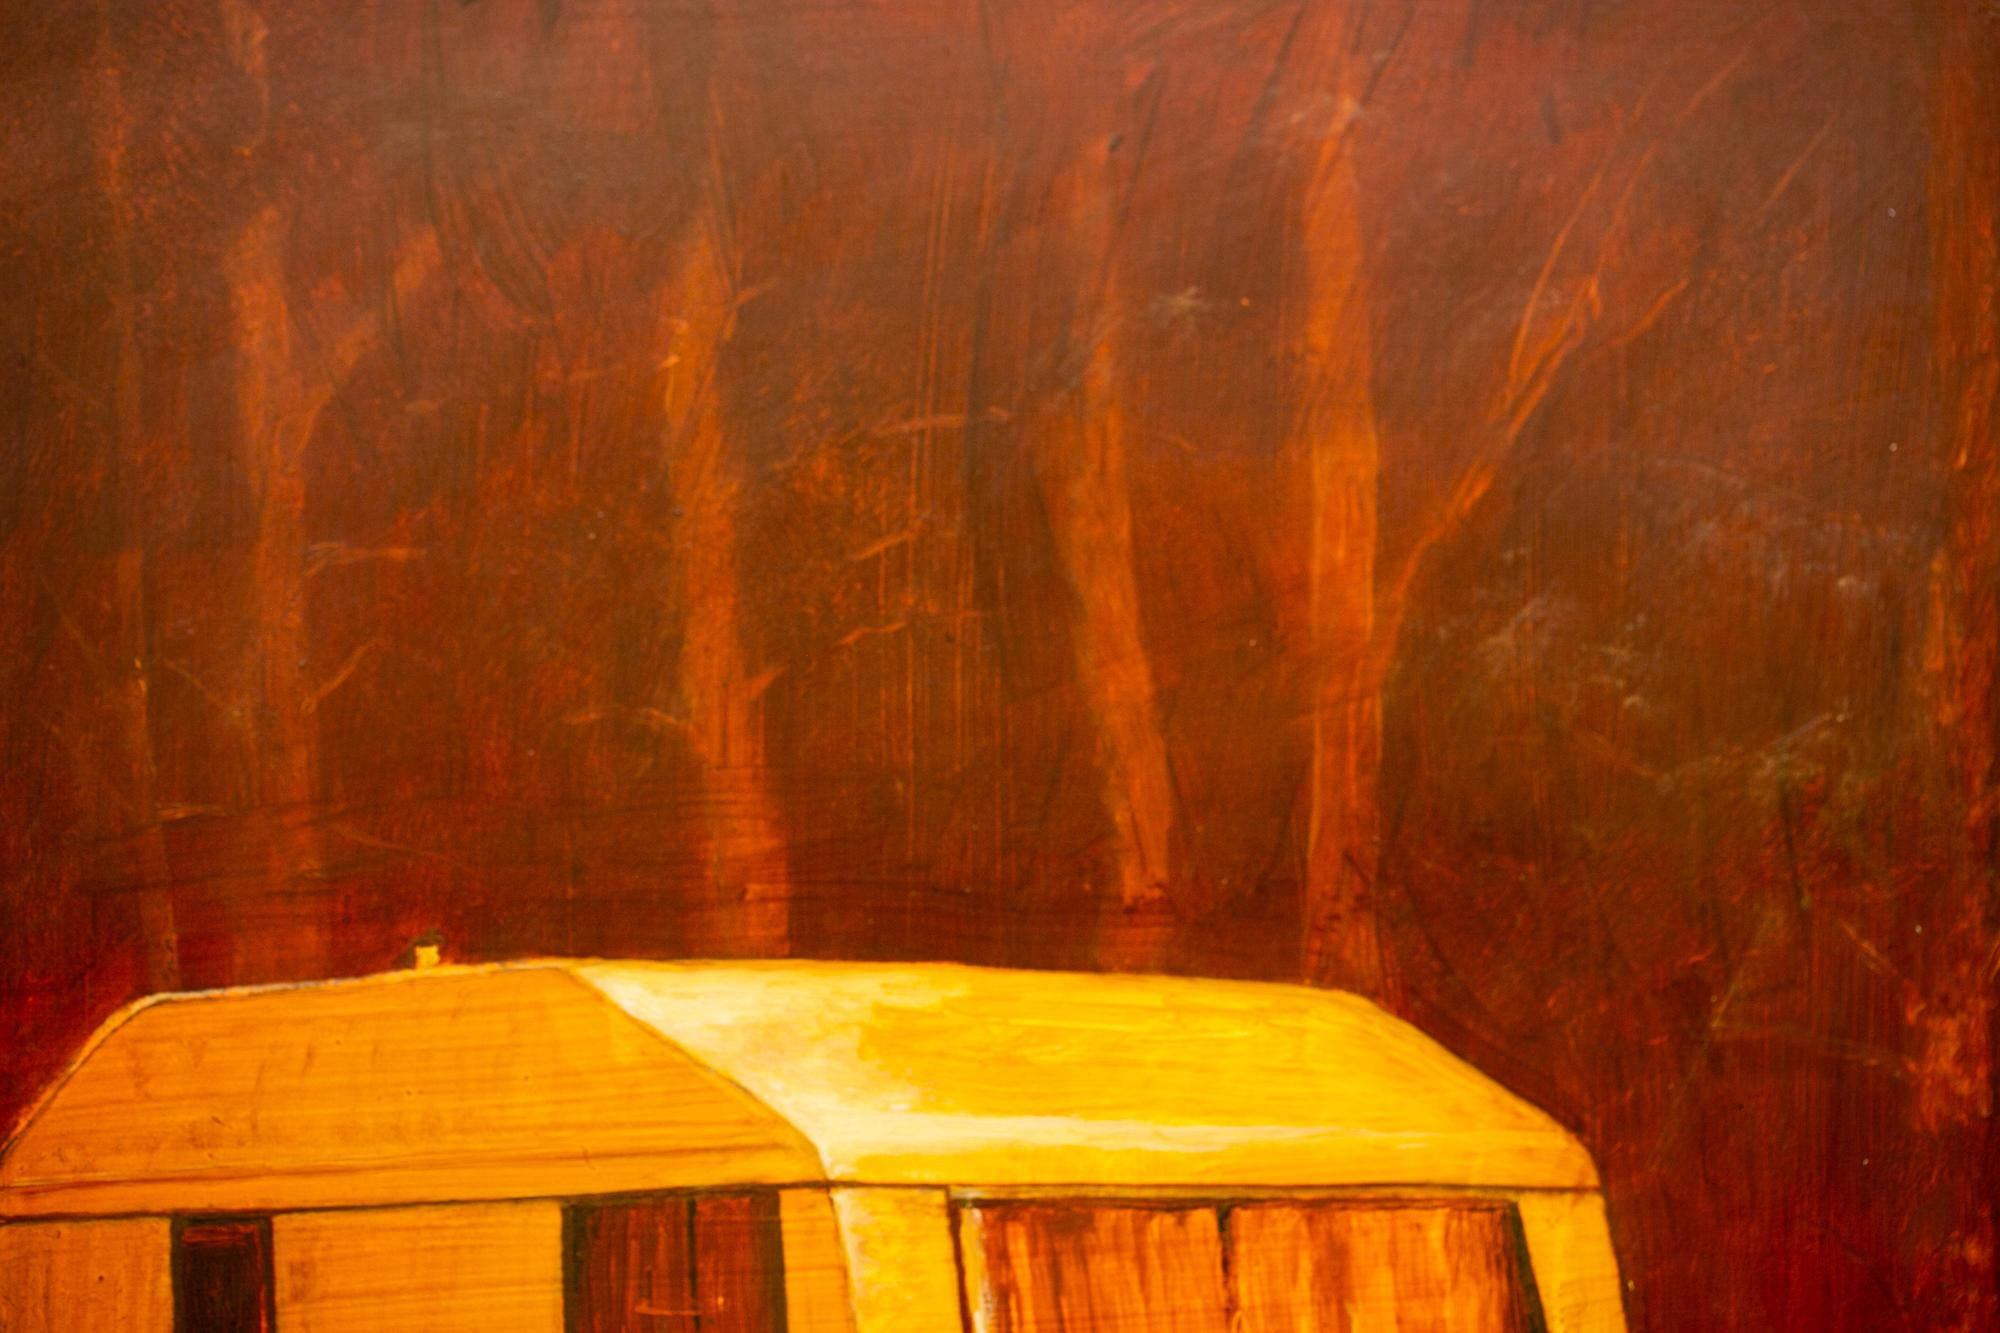 This orange painting of a camper van in a landscape titled 